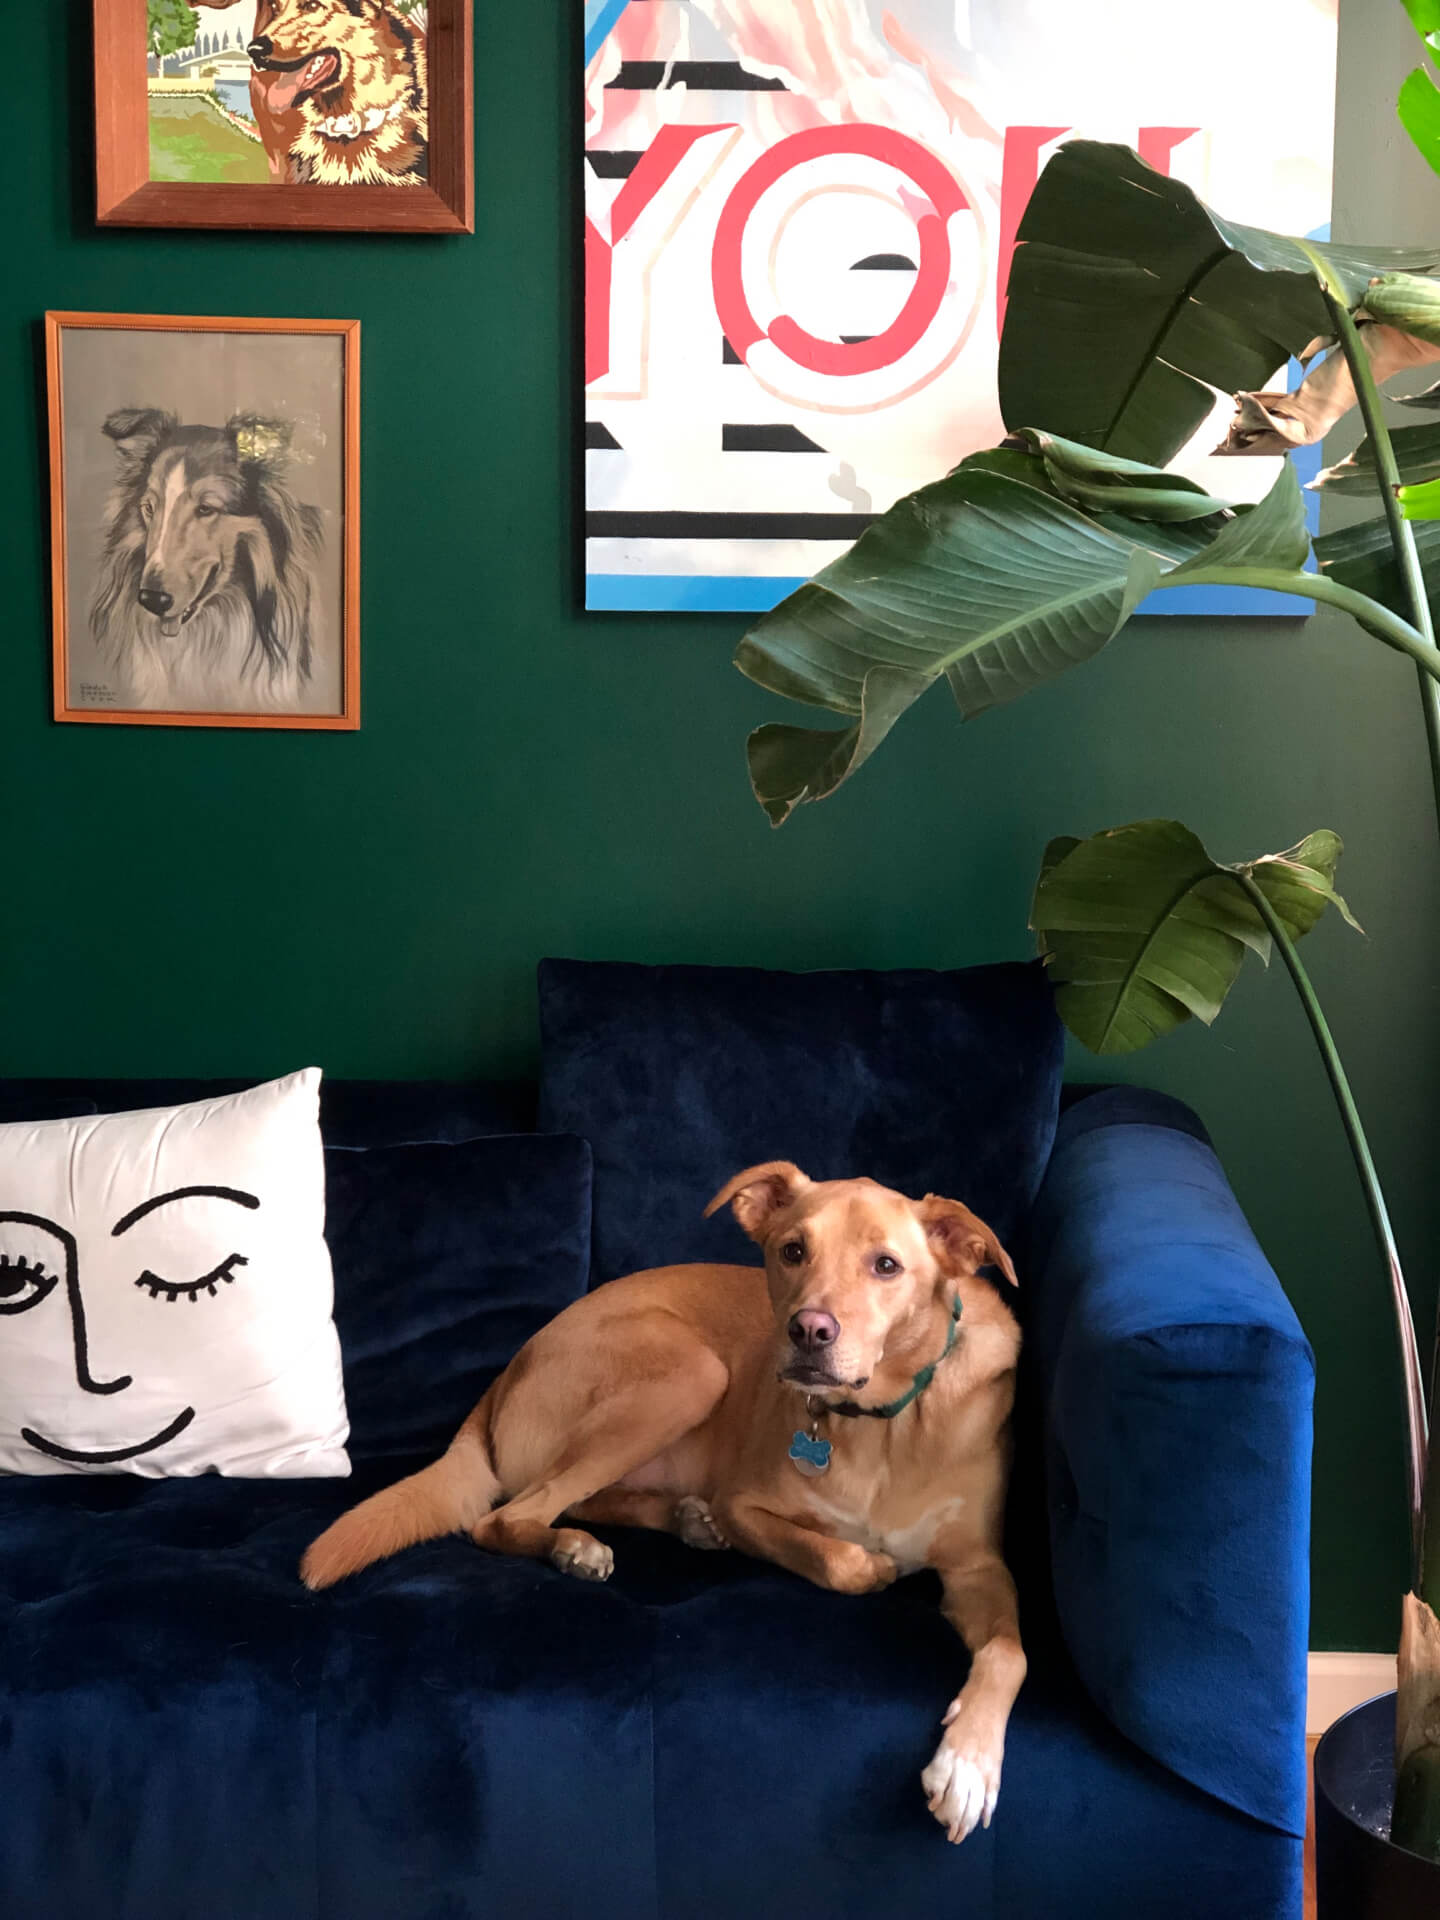 A cute dog sits on a velvet blue couch, in front of paintings of dogs, next to a bird of paradise plant